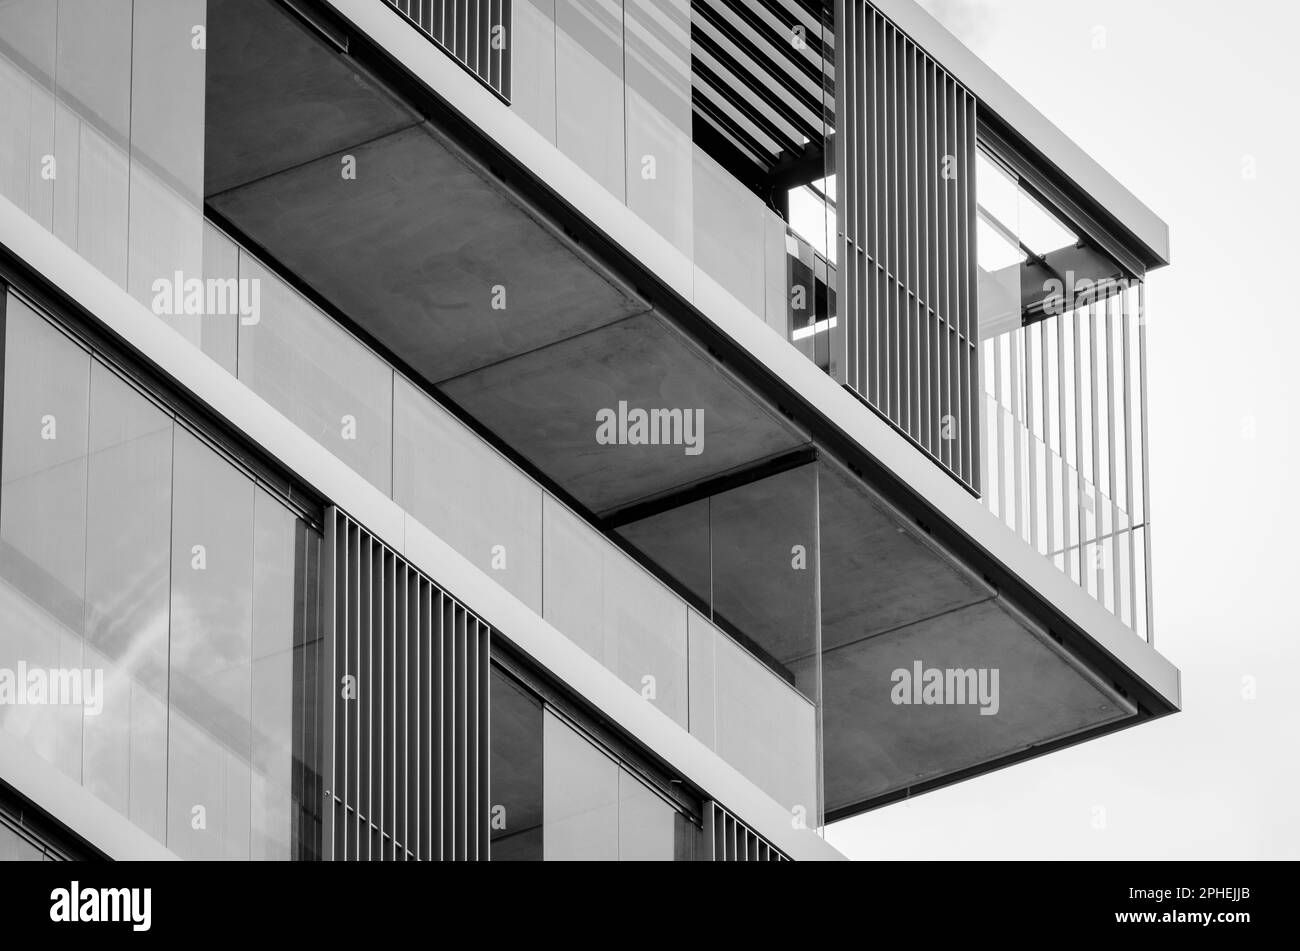 Close up of a modern building balcony made of glass, steel and geometric elements Stock Photo